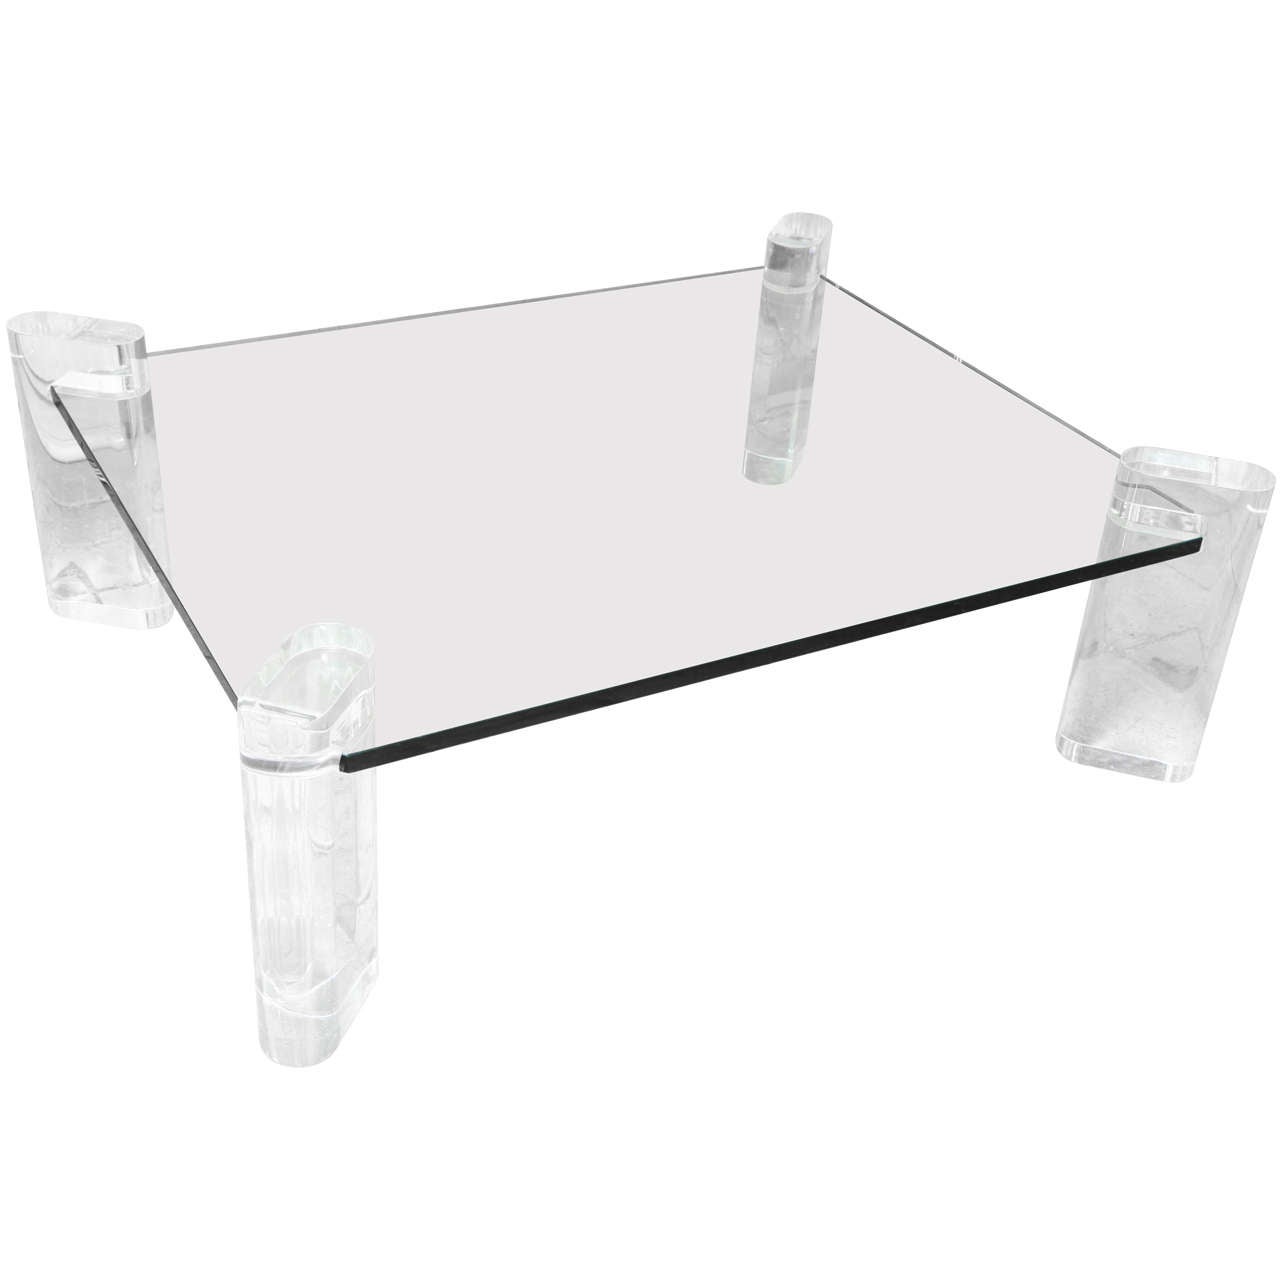 Karl Springer Thick Lucite Leg And Glass Coffee Table